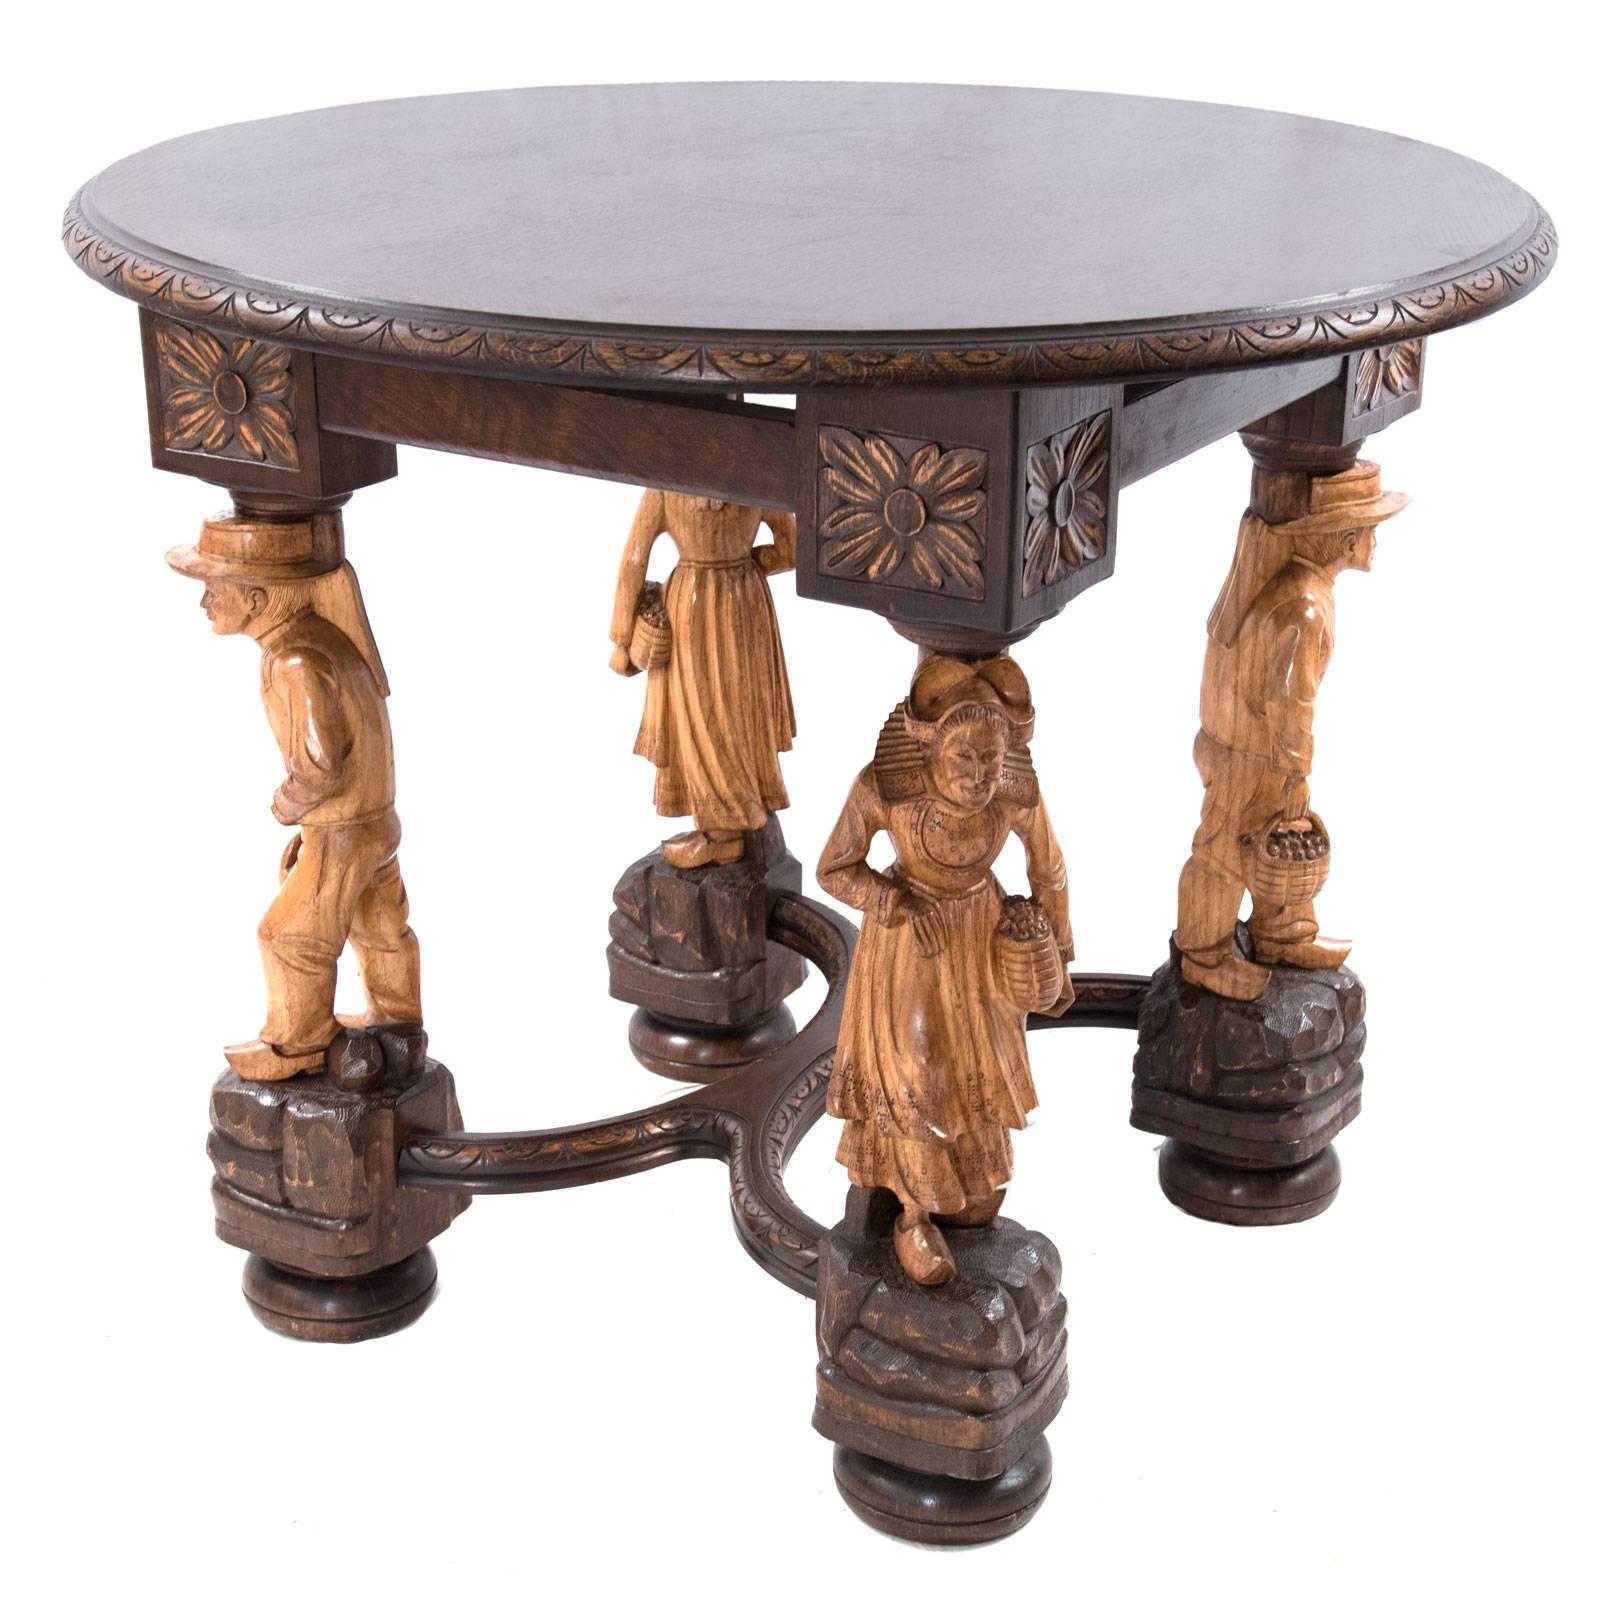 19th Century French Gueridon Table with Carved Figural Legs In Good Condition For Sale In Salt Lake City, UT